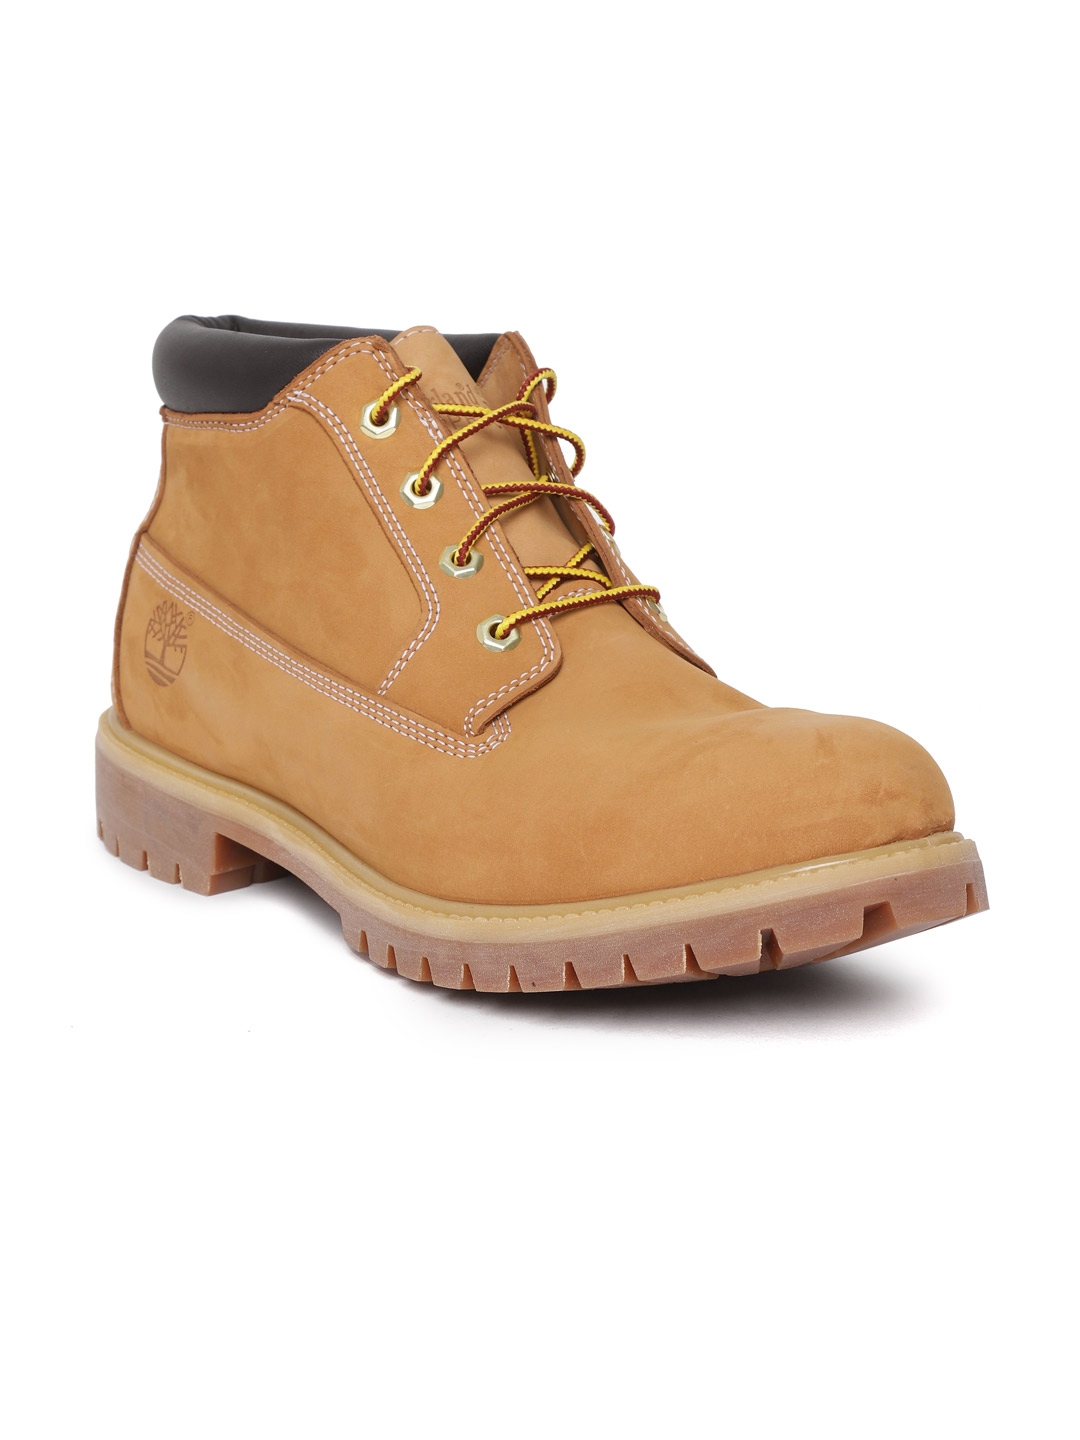 timberland boots heritage